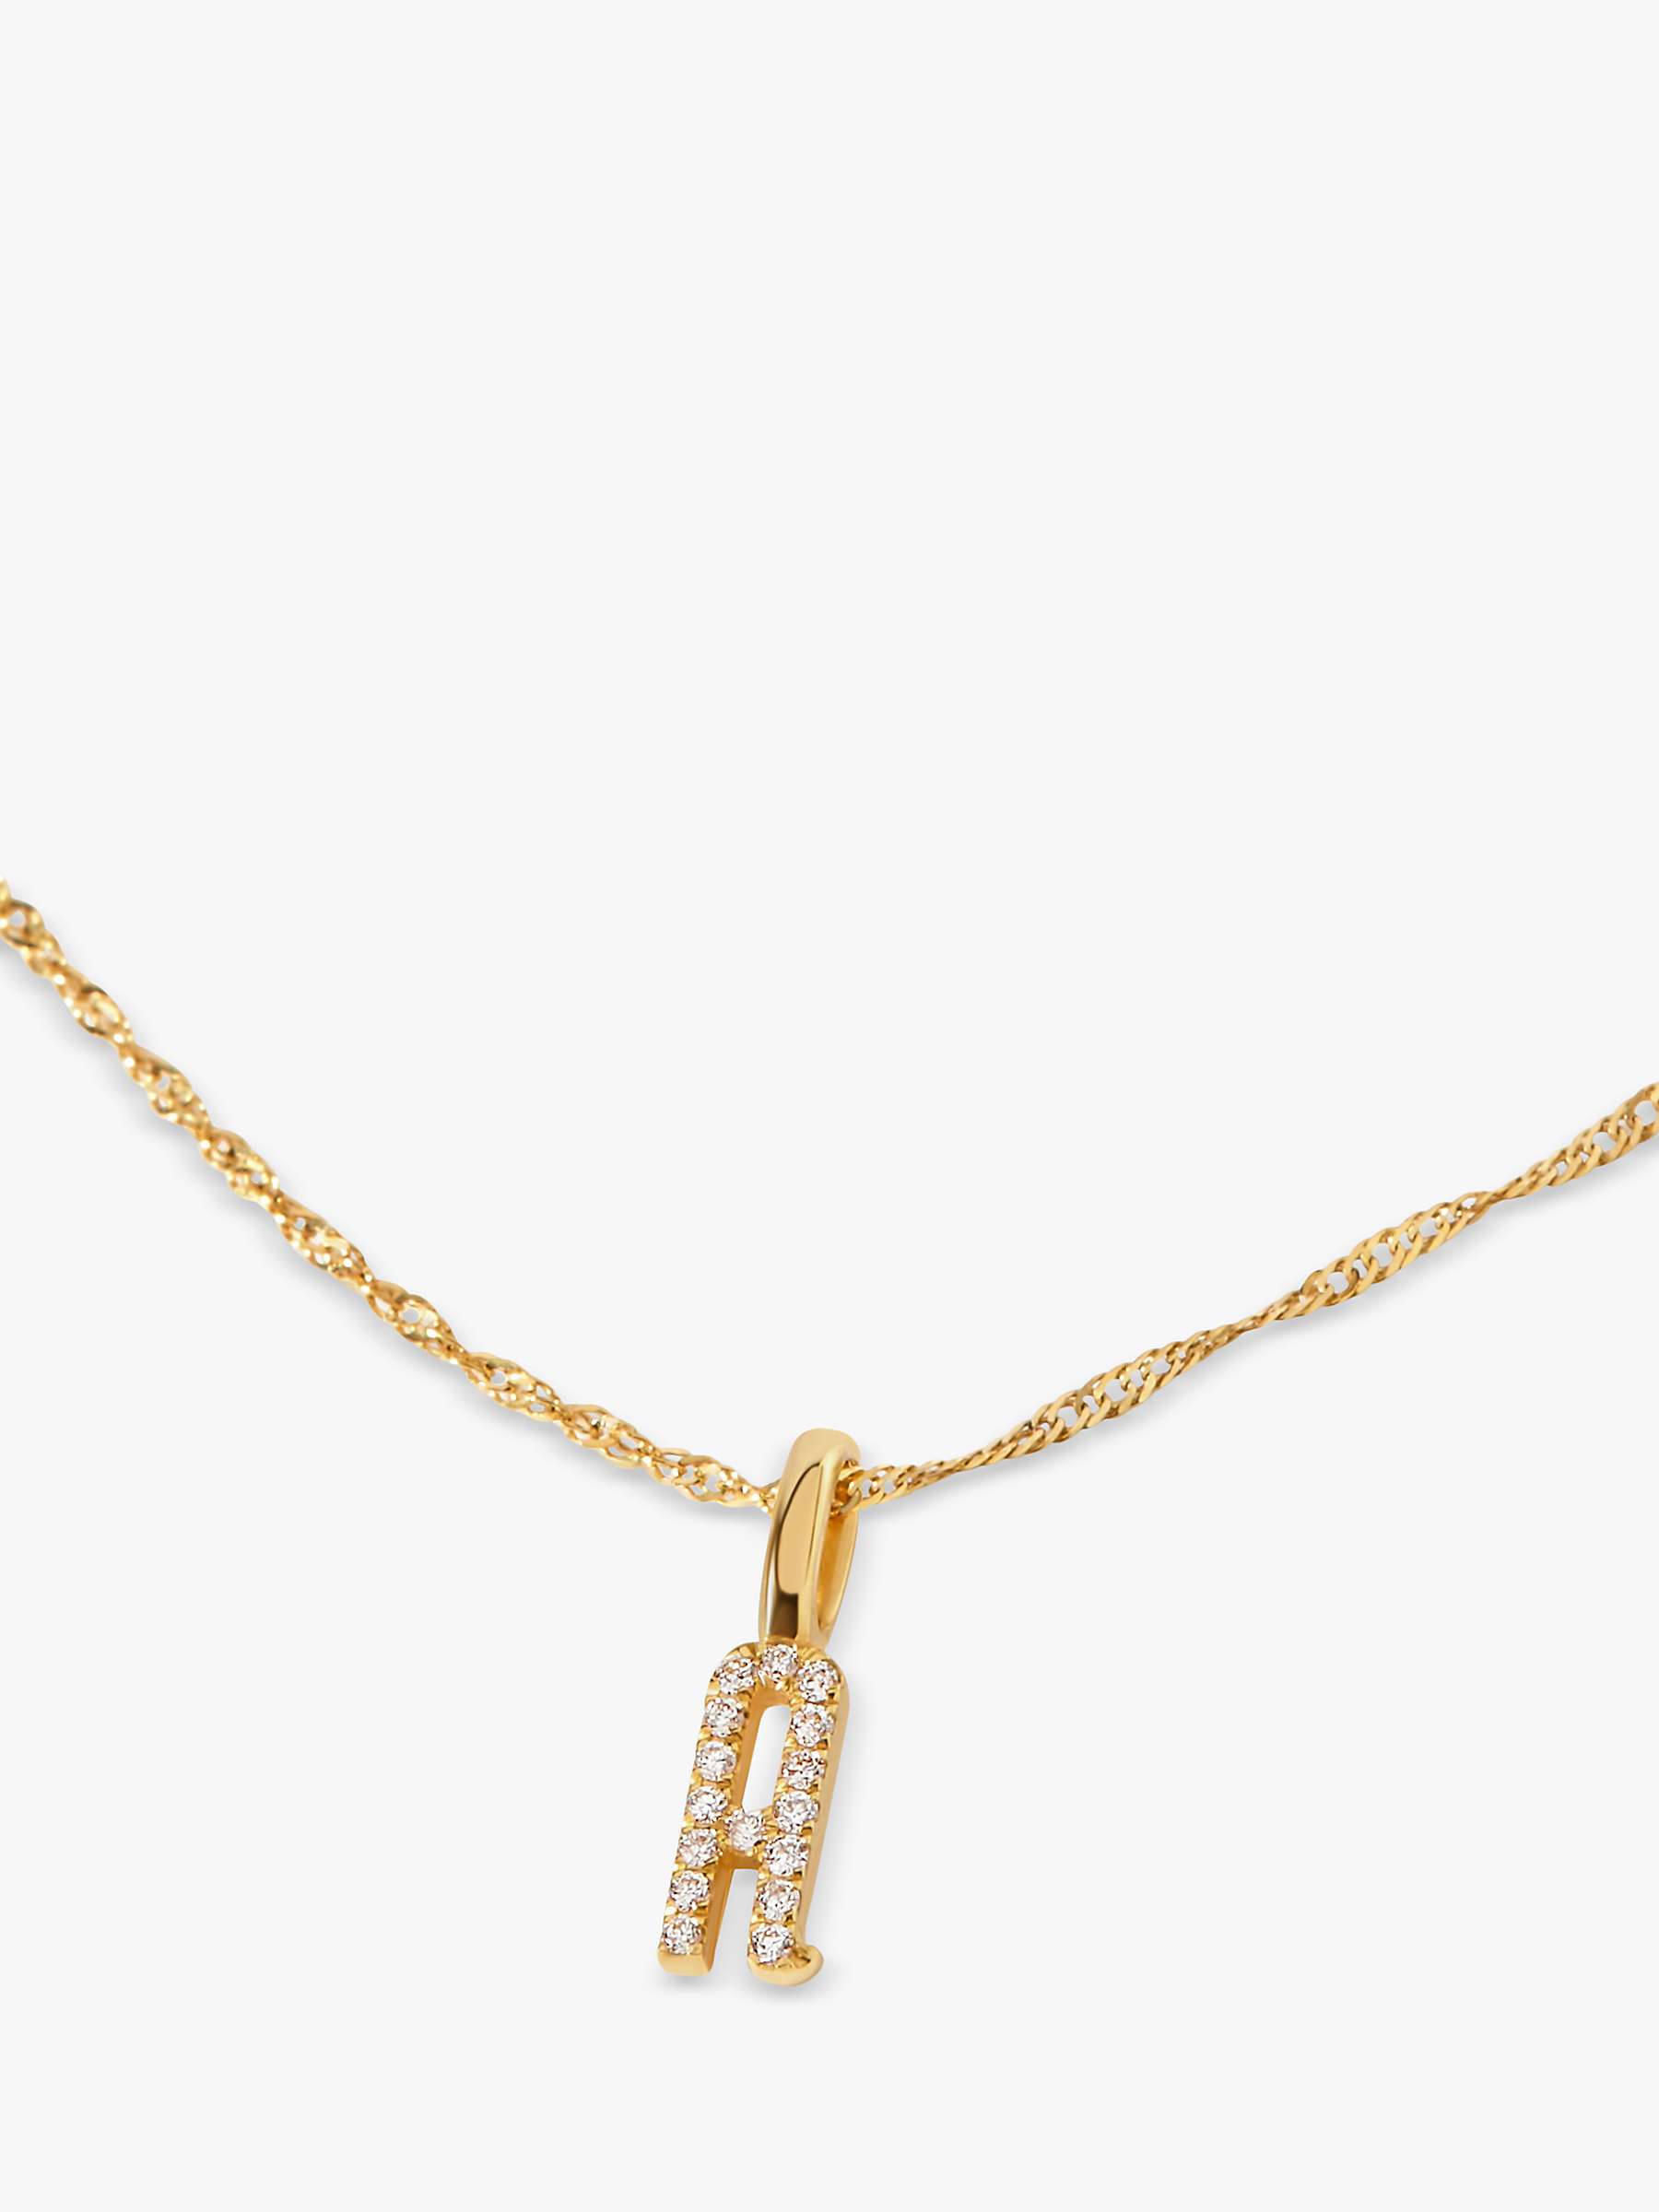 Buy Edge of Ember 14ct Gold Diamond Initial Pendant Necklace Online at johnlewis.com